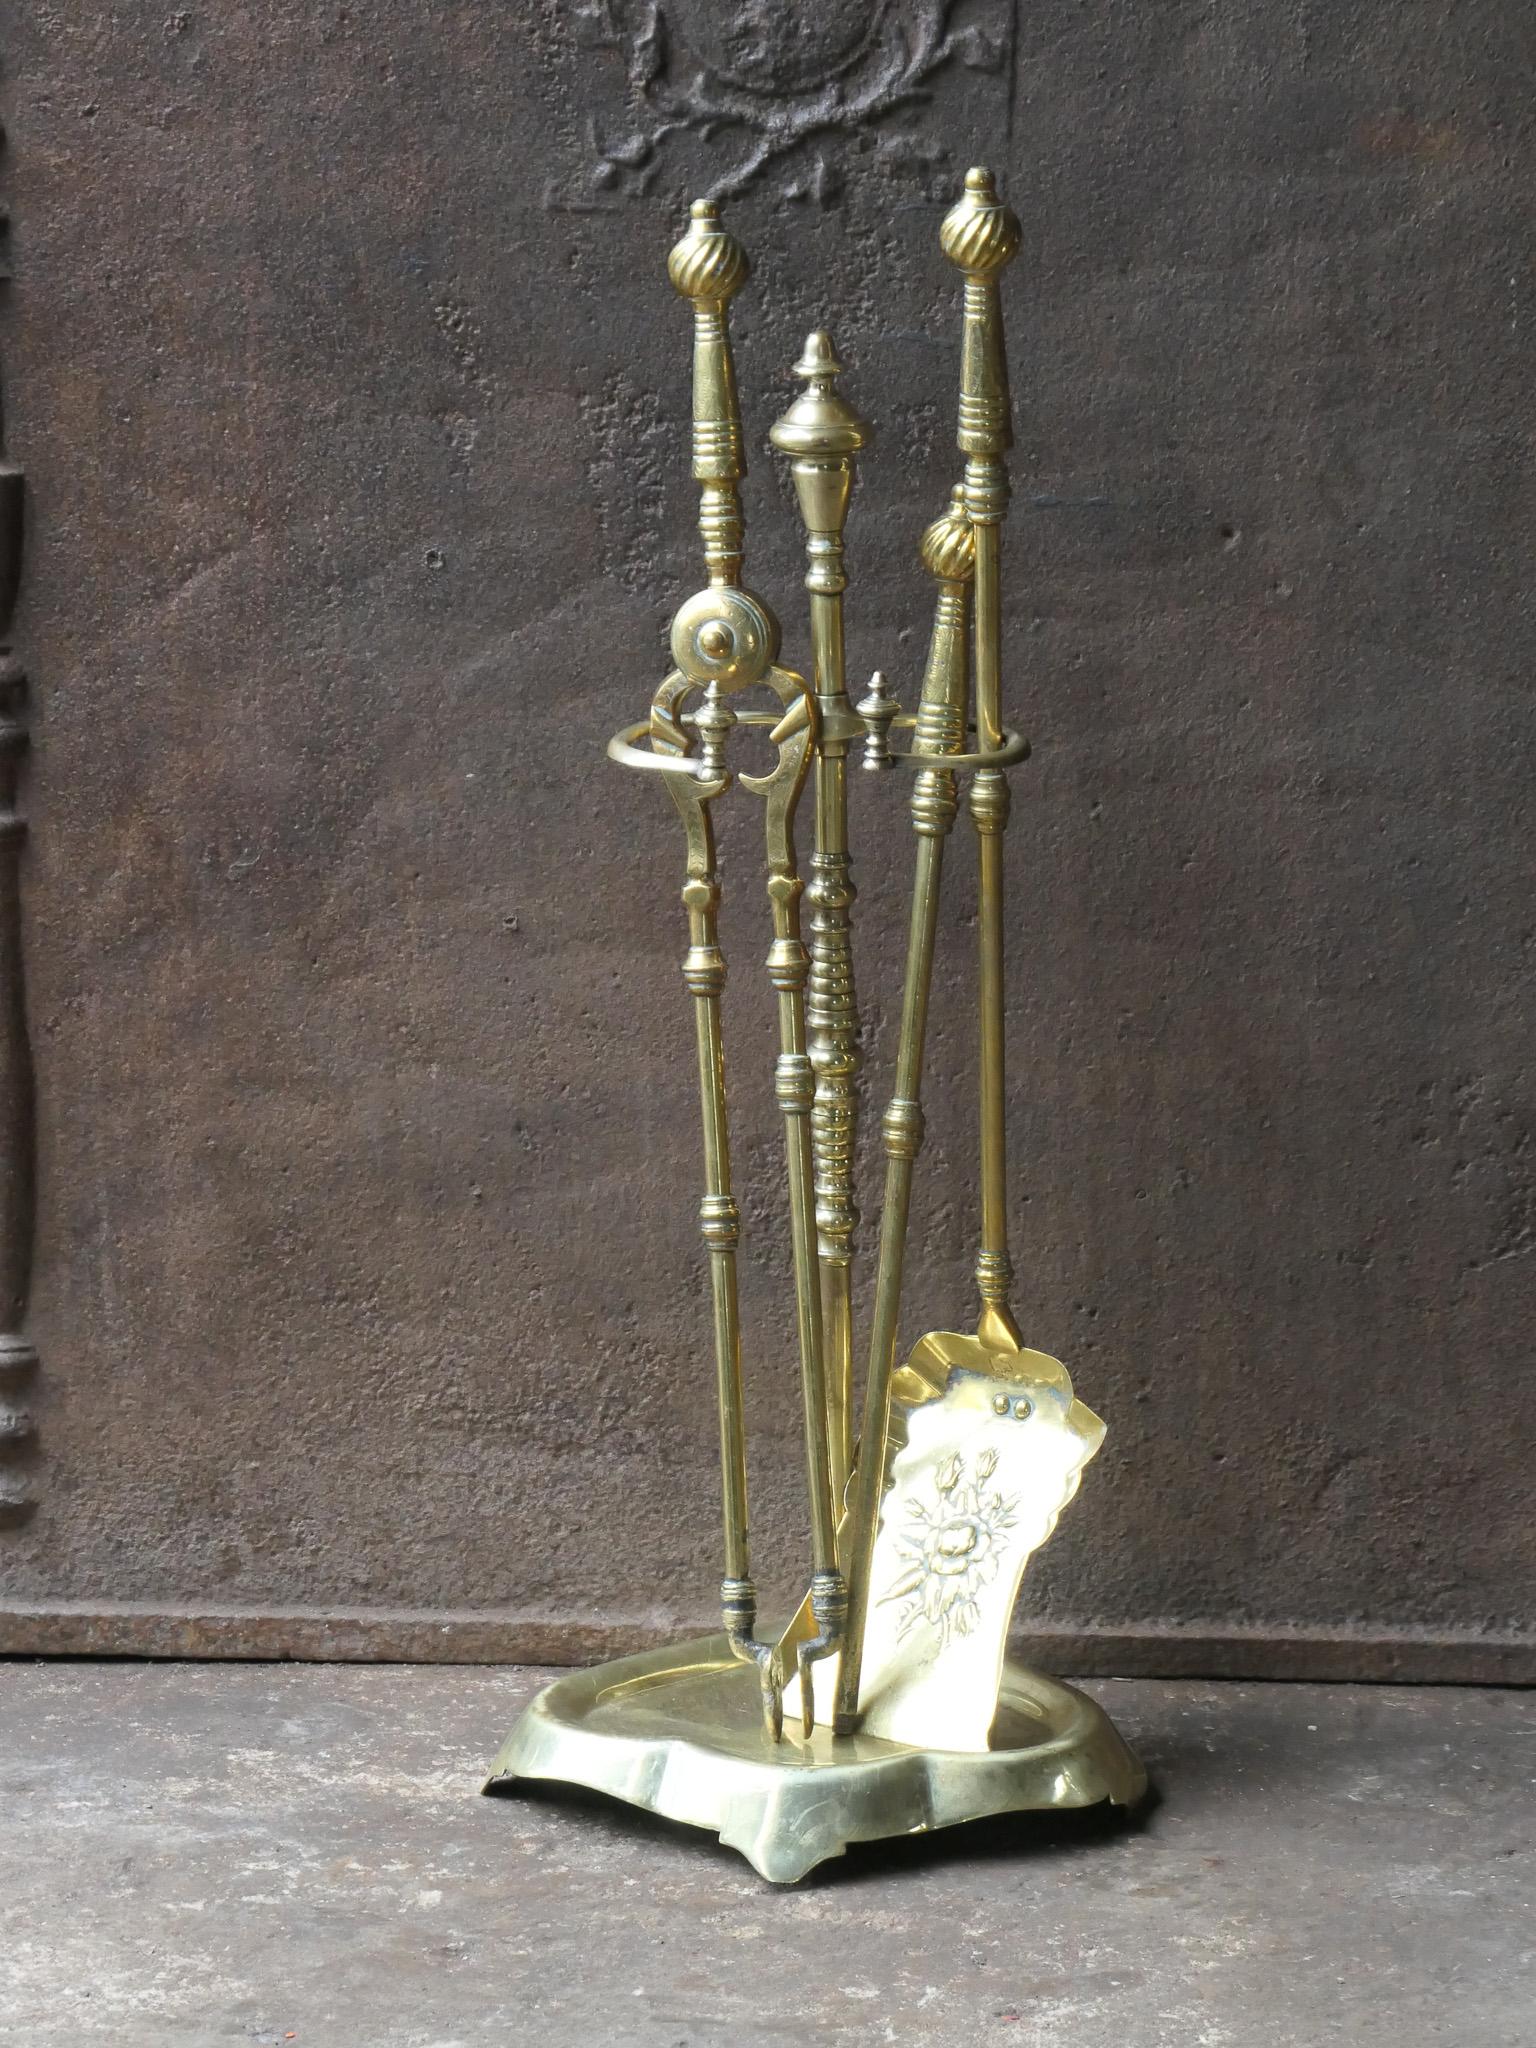 Late 19th or early 20th century French Art Nouveau period fireplace toolset. The toolset consists of a stand with three fireplace tools. It is made of brass. The condition is good.







 